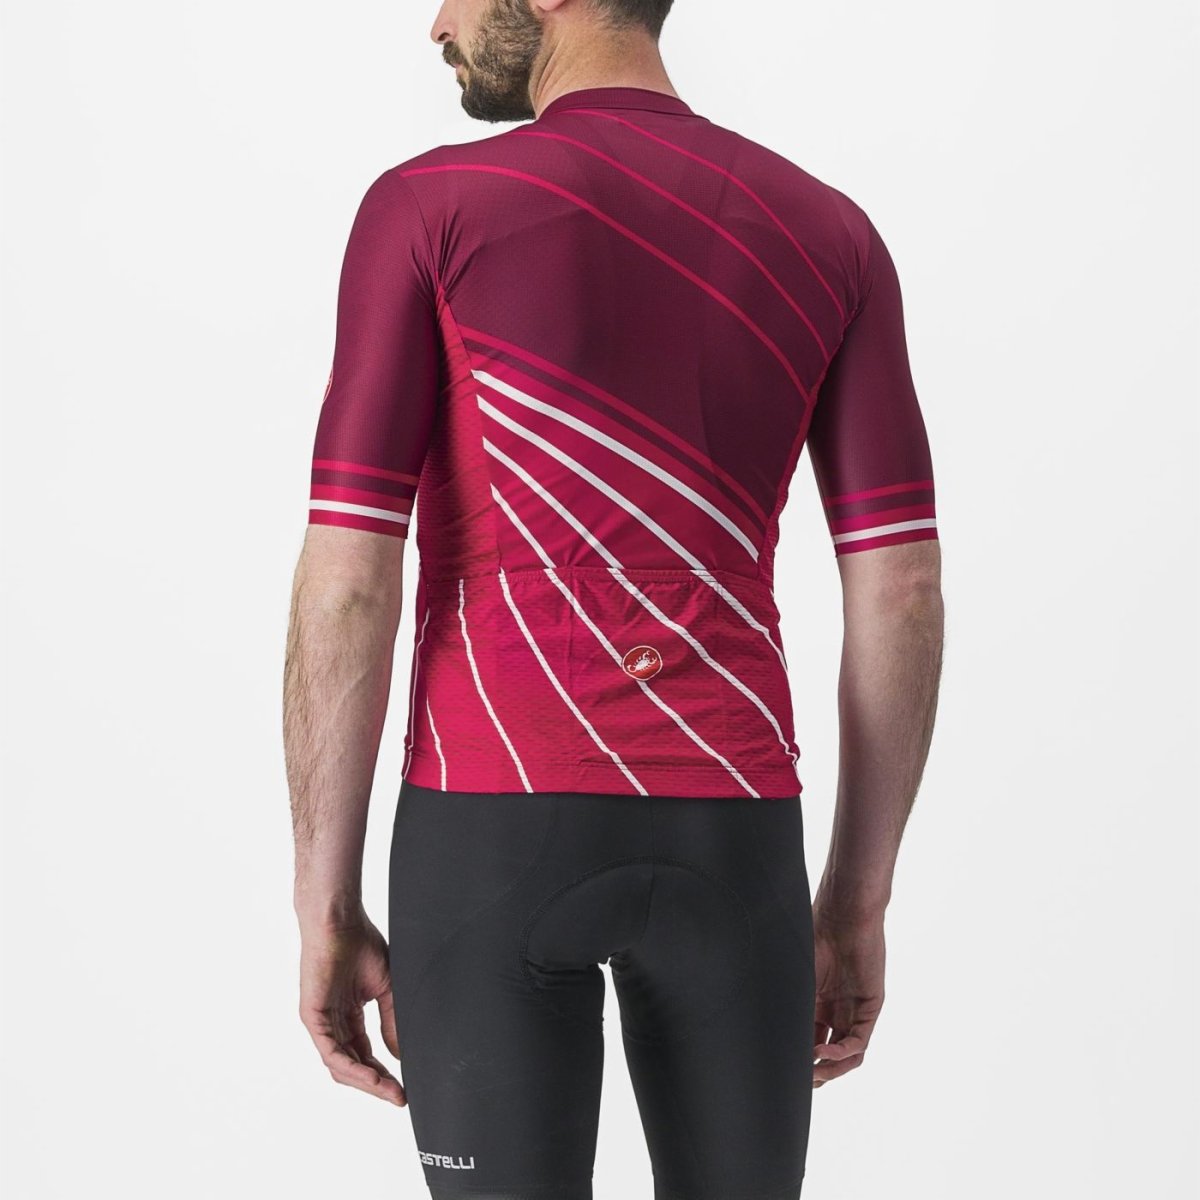 Castelli Speed Strada Men's Cycling Jersey (Bordeaux/Persian Red)